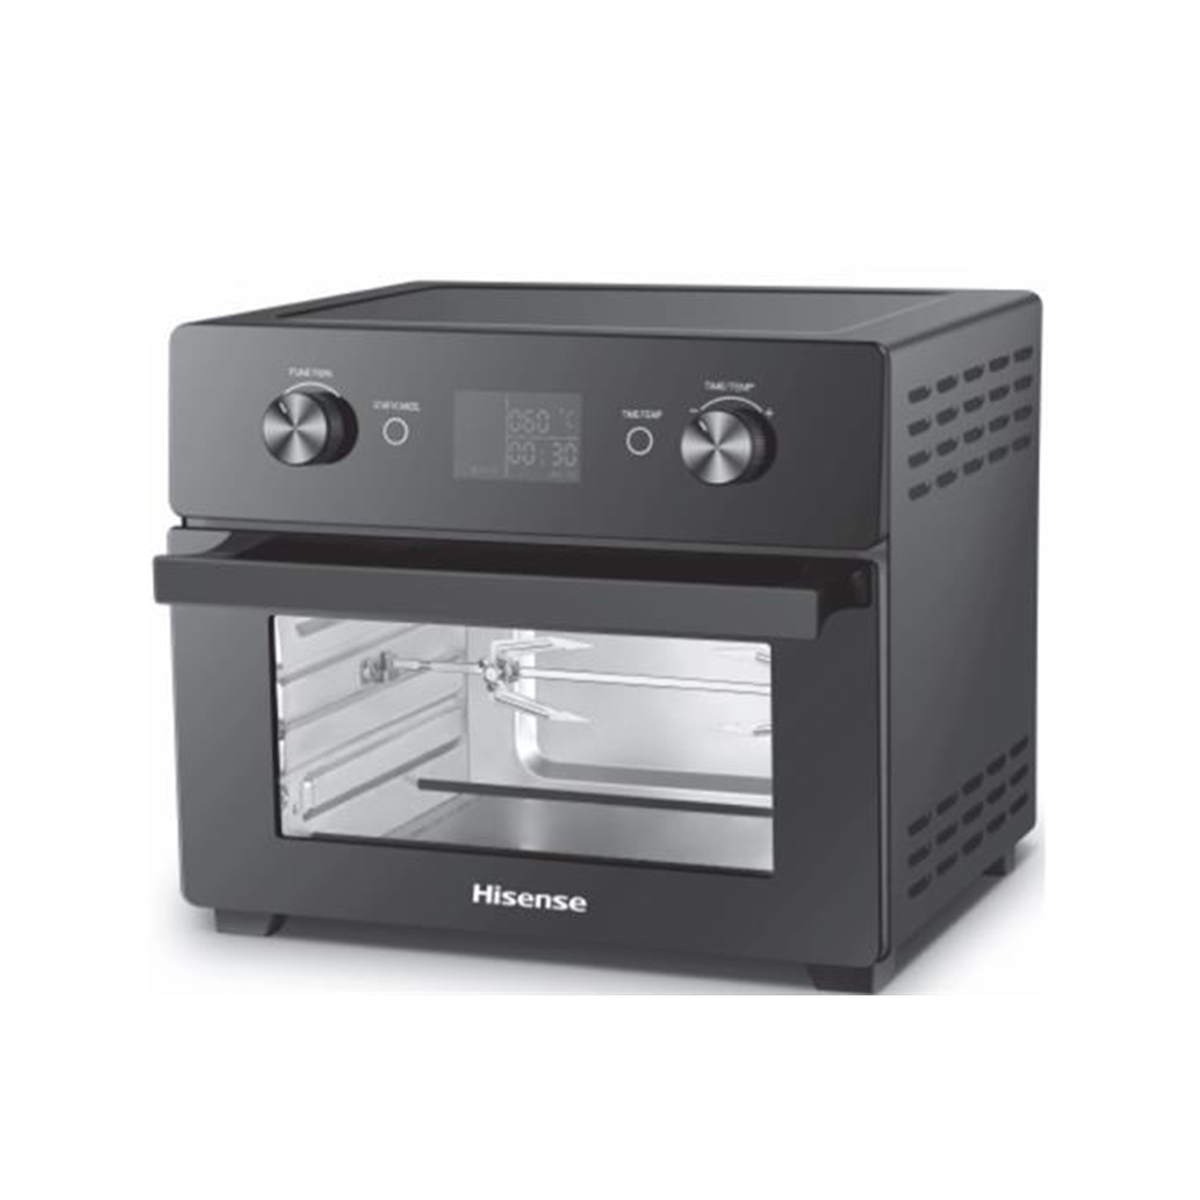 Hisense 20 Litre 1800w Digital Air Fryer Oven with Rotisserie